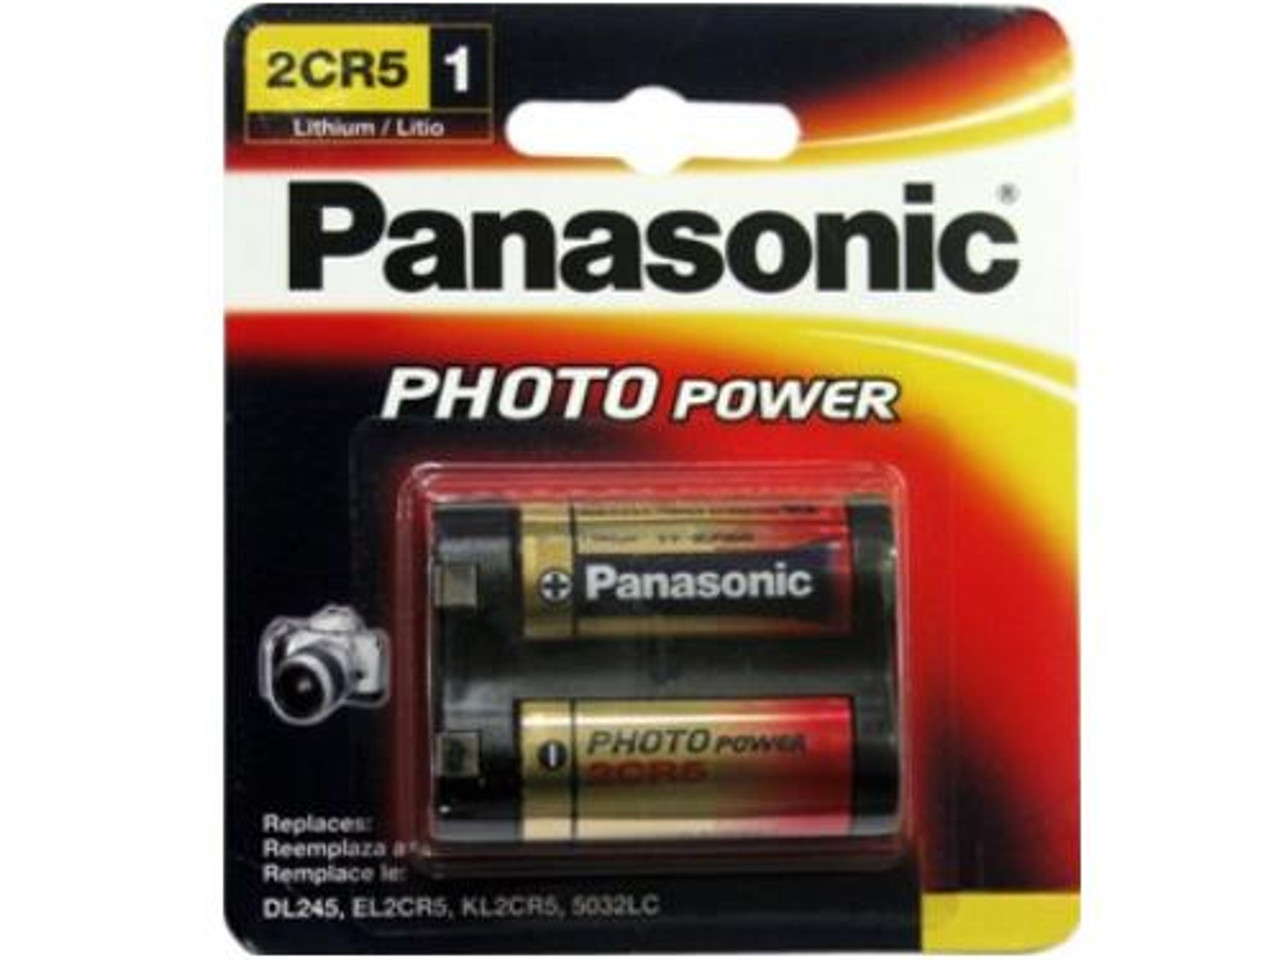 Panasonic 2CR5 Battery (12 Pack) 6 Volt Lithium for Camera - Photo